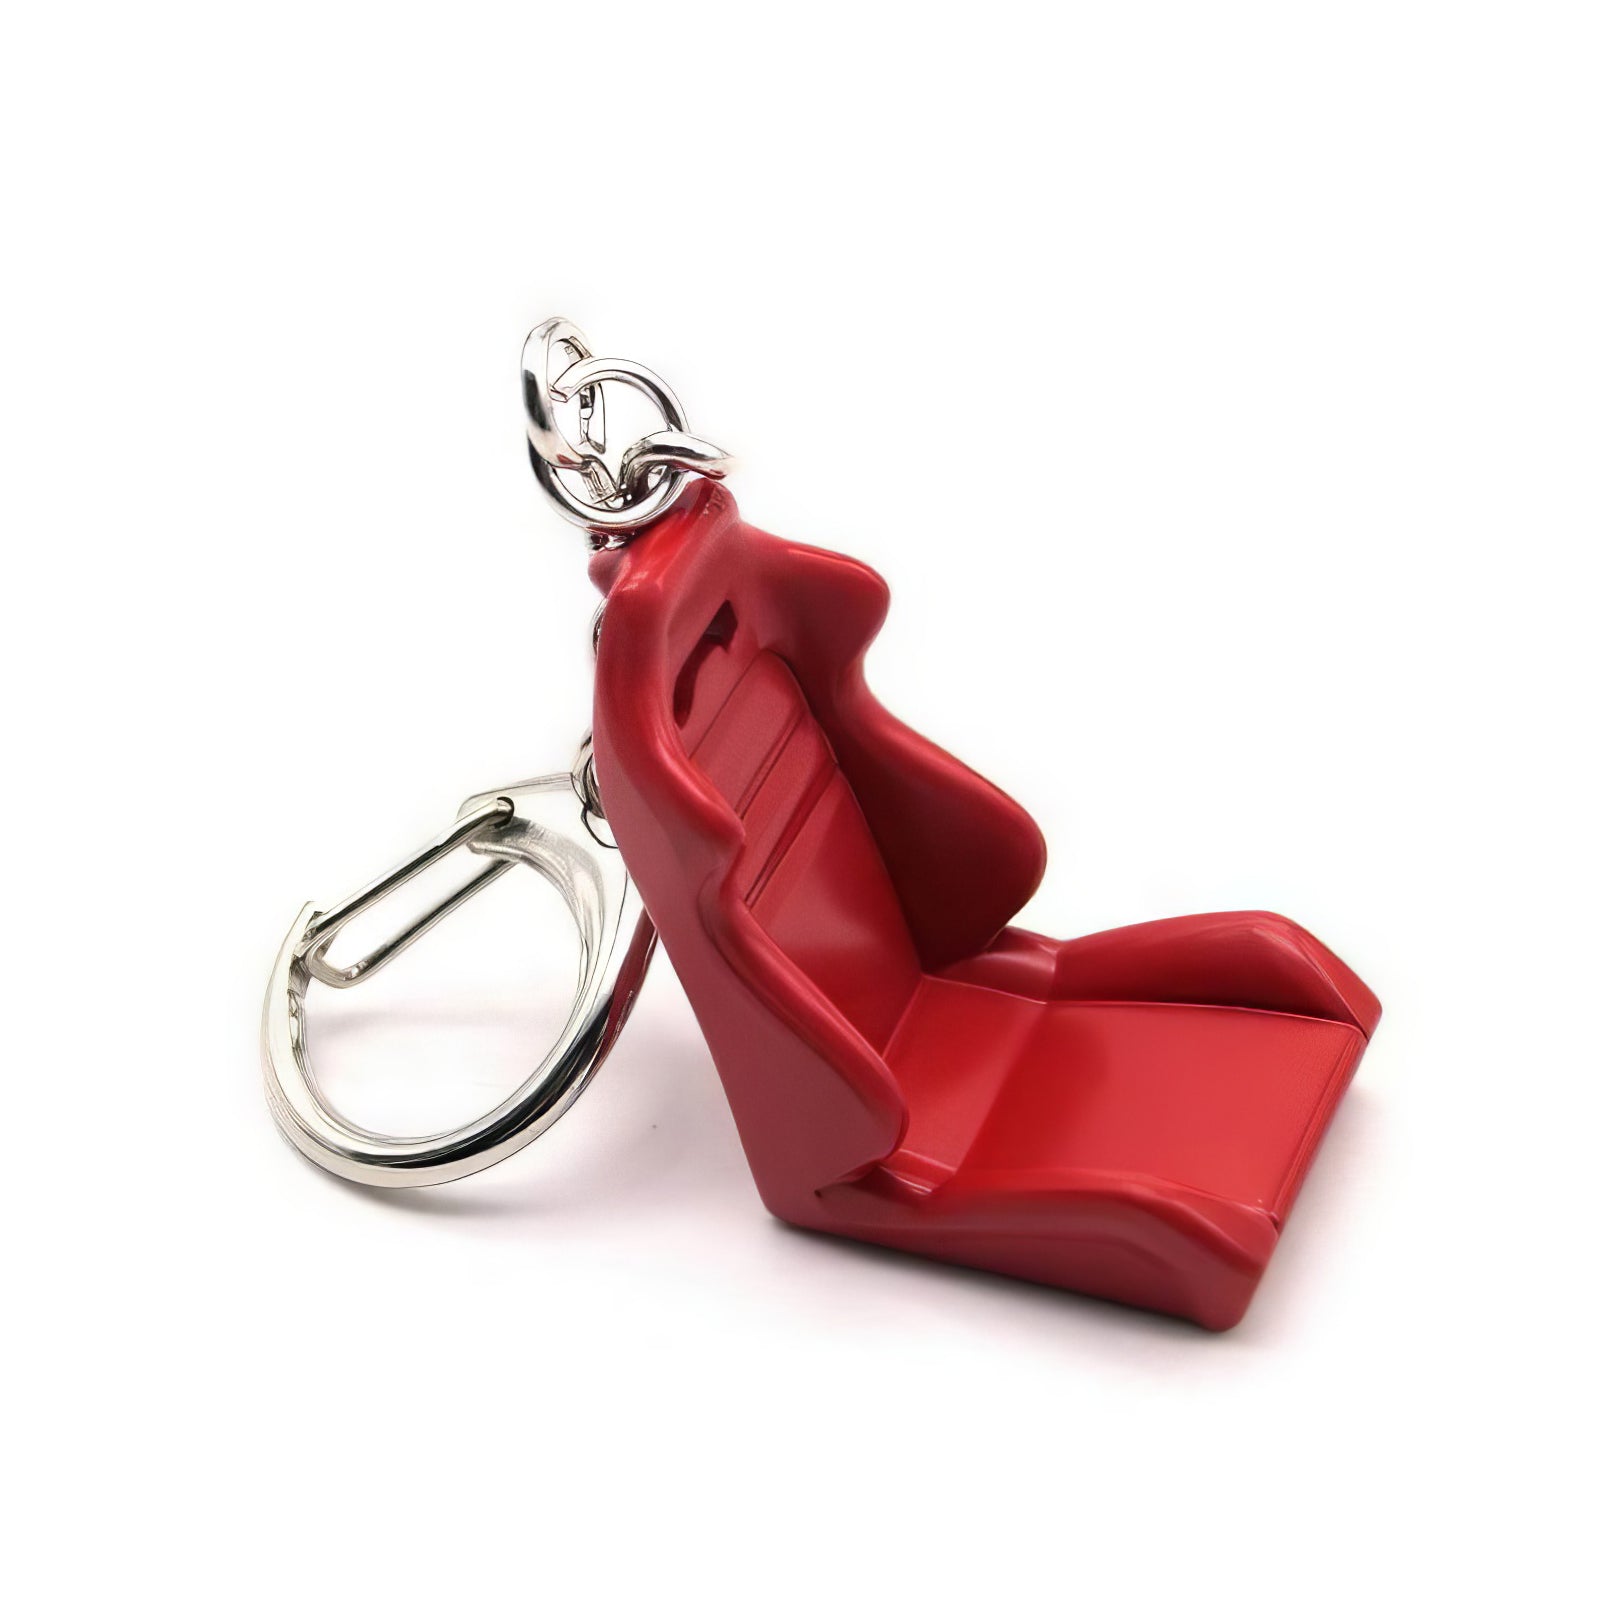 Racing seat car keychains in red.